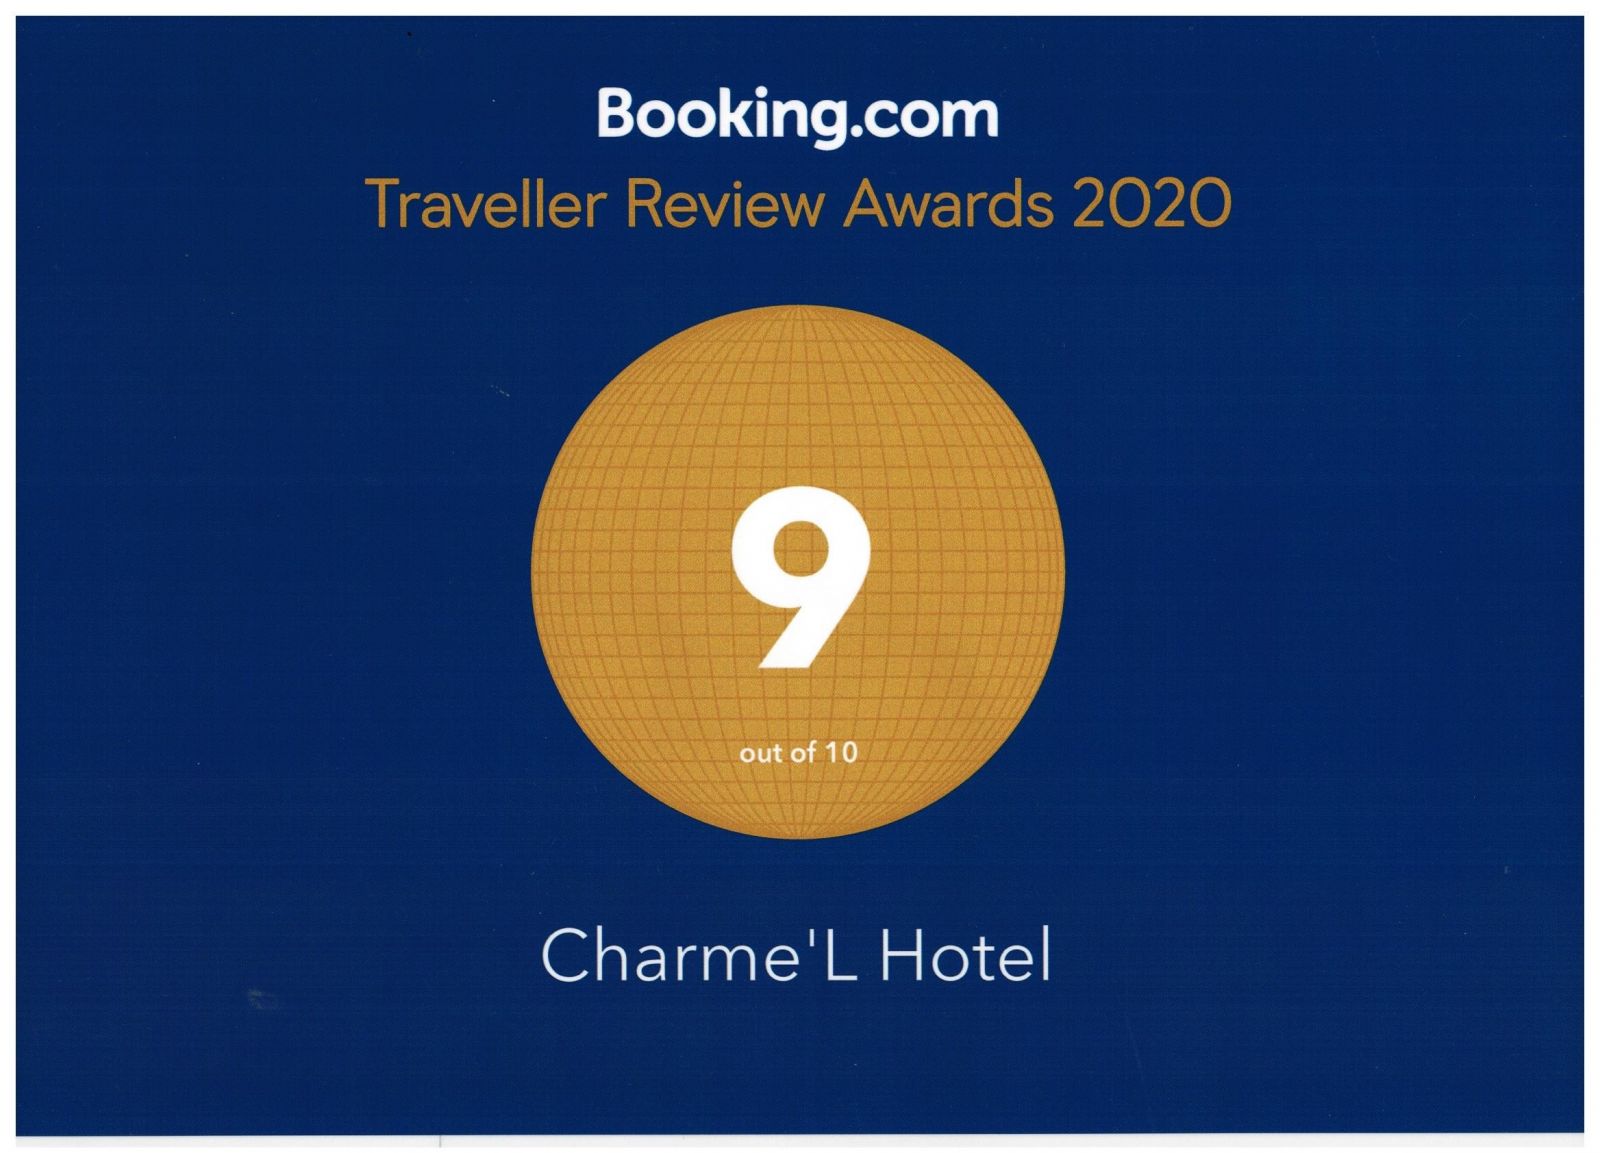 Charme'L Hotel Booking.com Review Award 2020